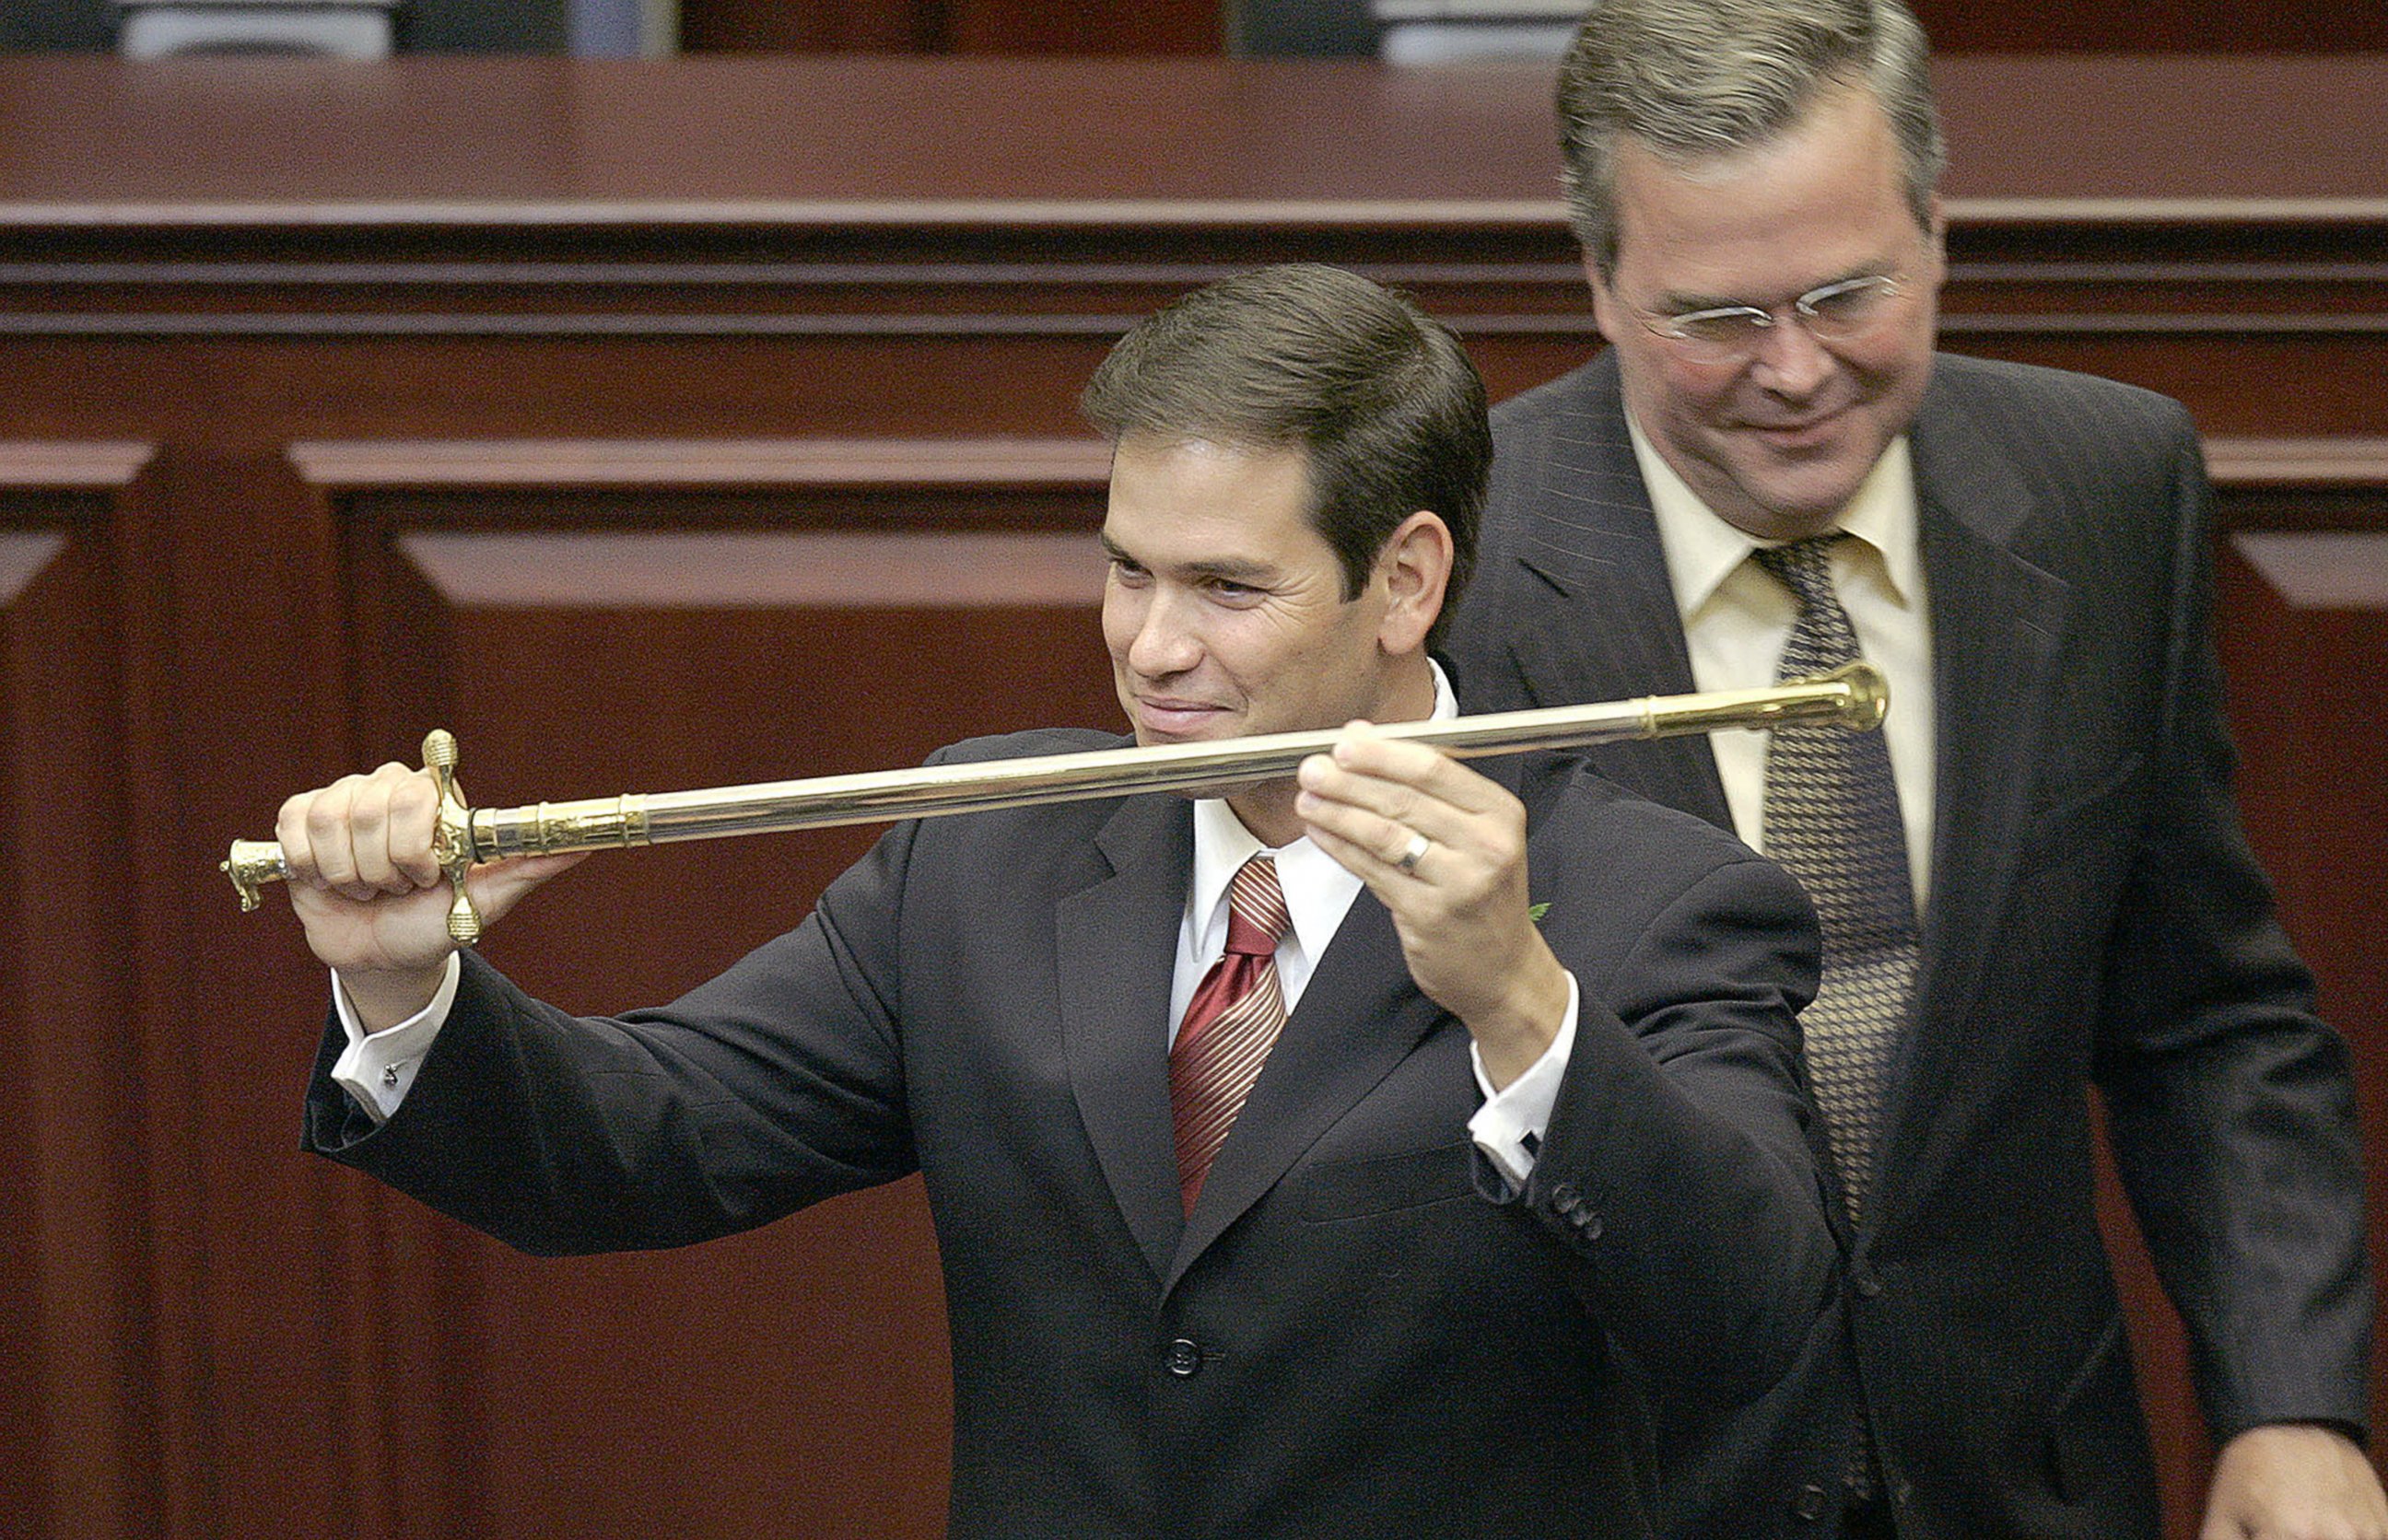 PHOTO: Marco Rubio, left, holds a sword presented to him by Jeb Bush, right, in Tallahassee, Fla. on Sept. 13, 2005.